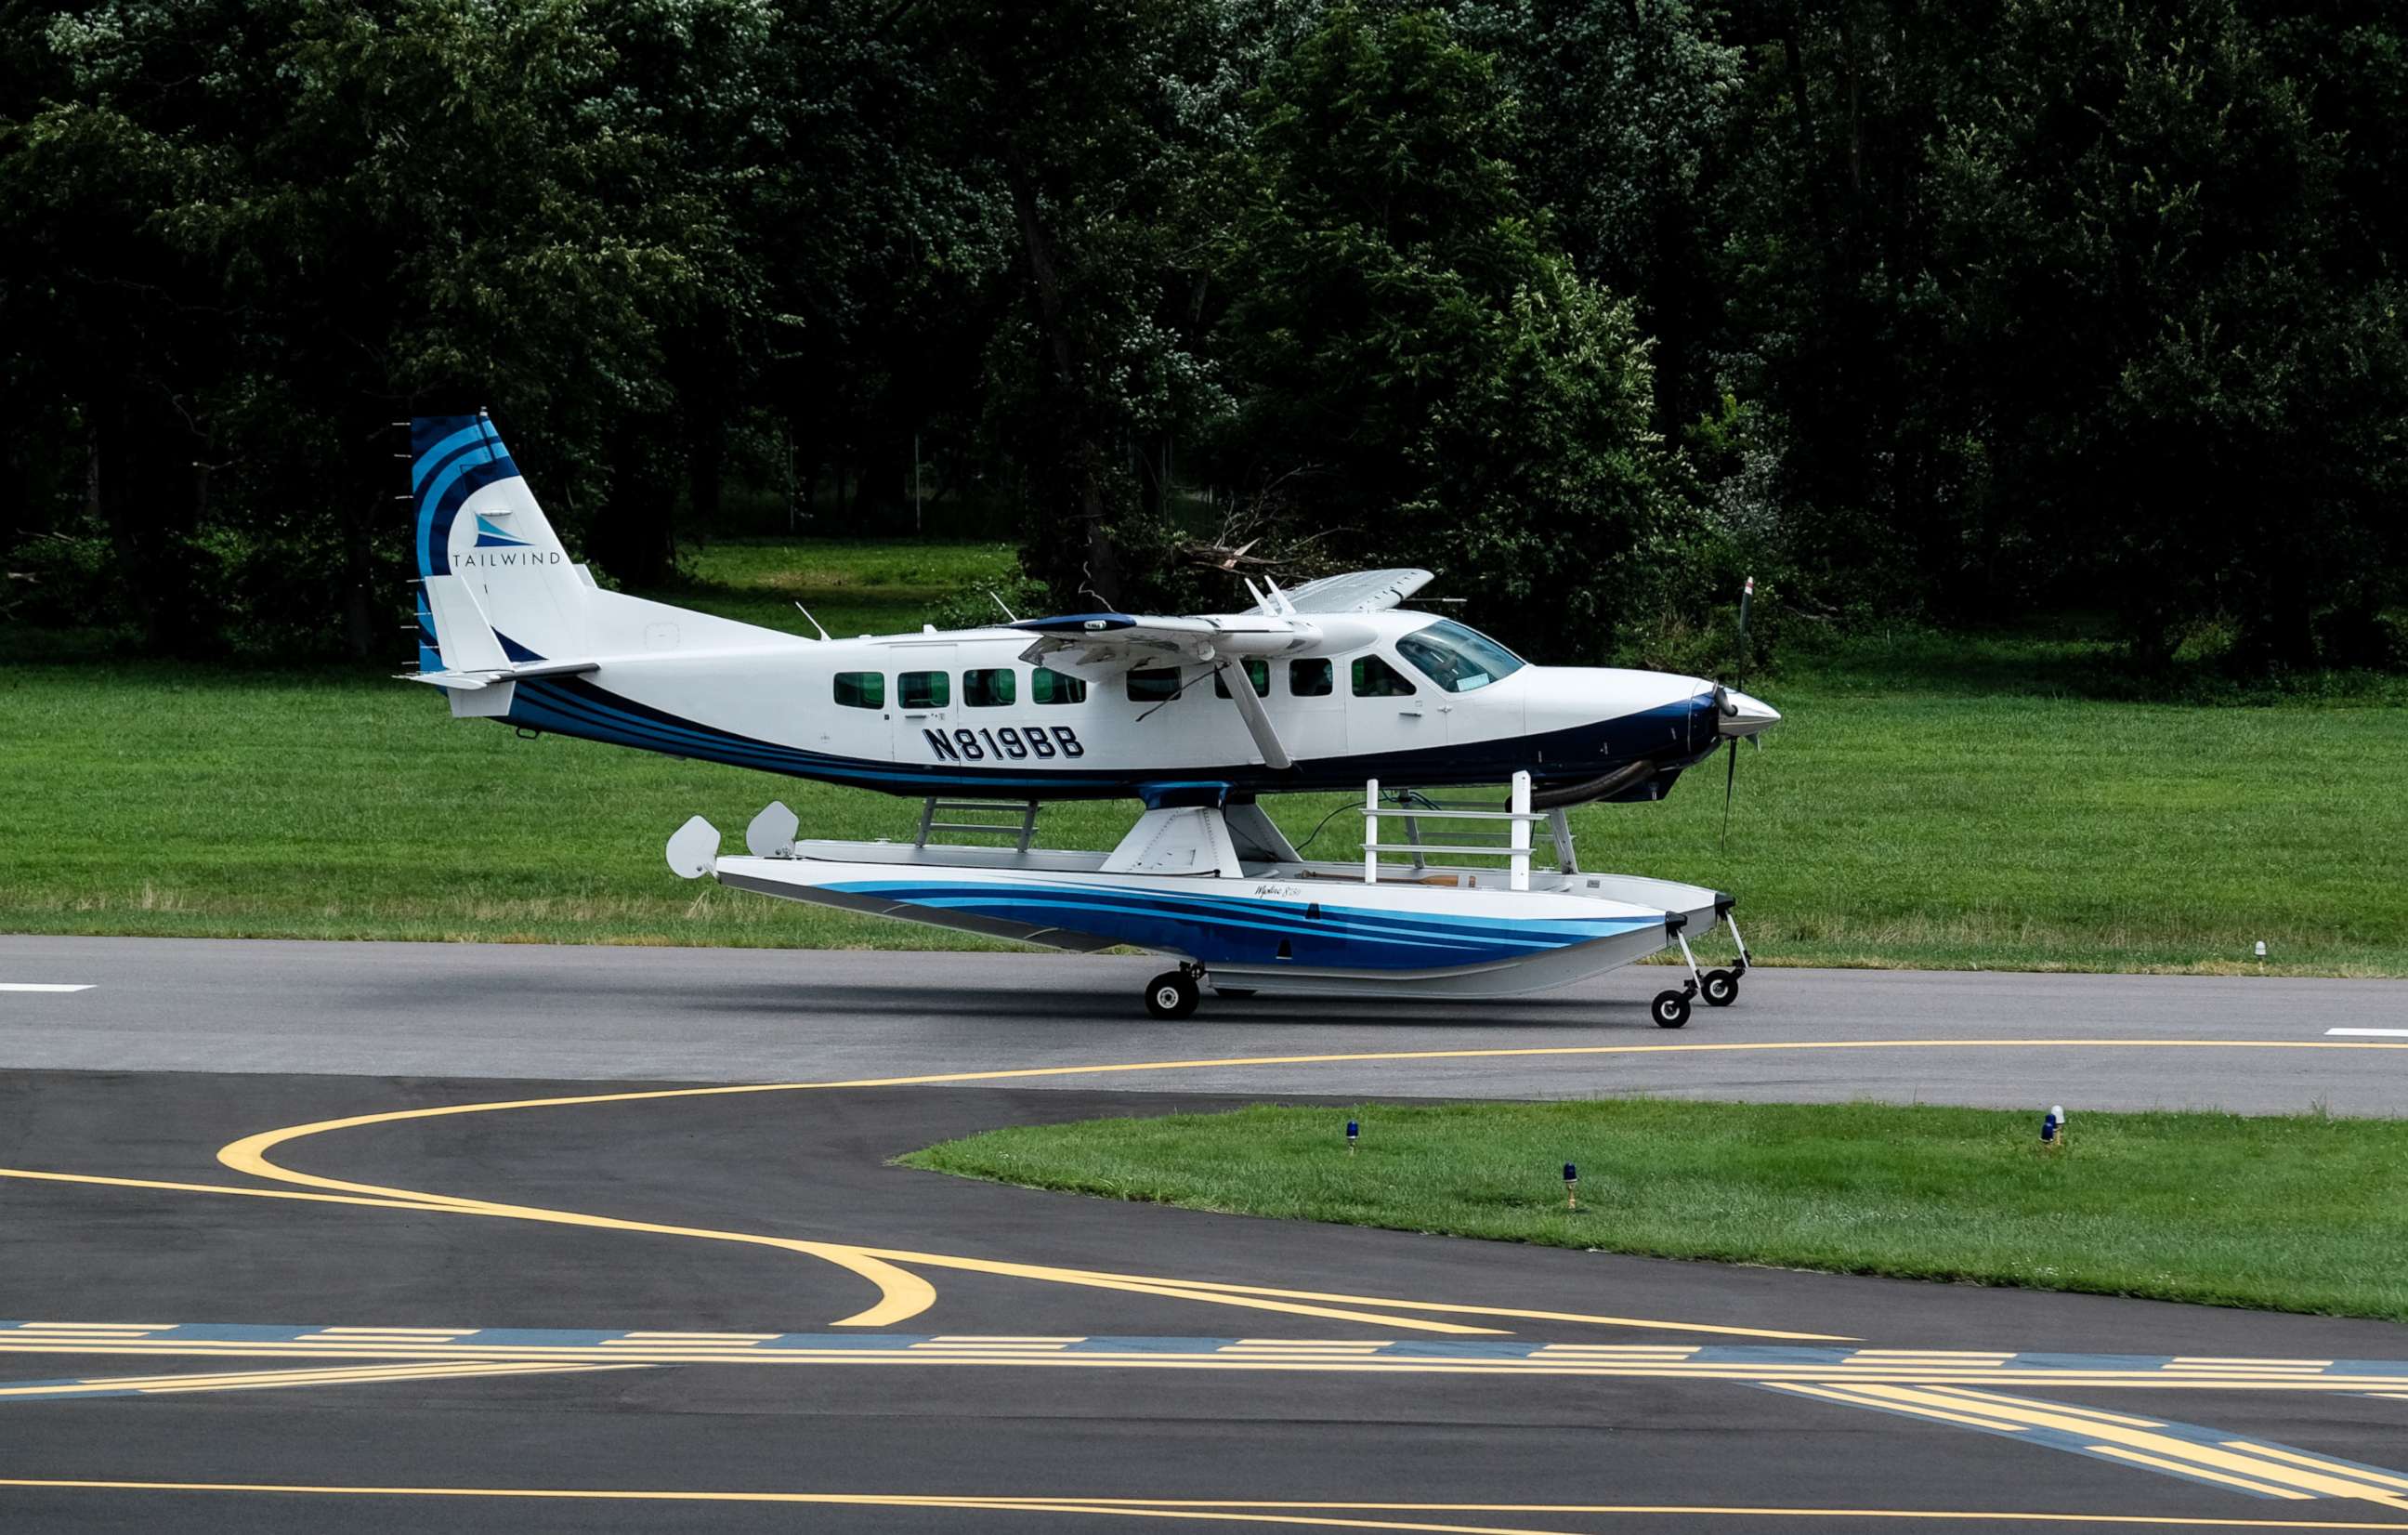 PHOTO: A Tailwind Air flight from New York City lands at the College Park Airport on Aug. 6, 2022, in College Park, MD.